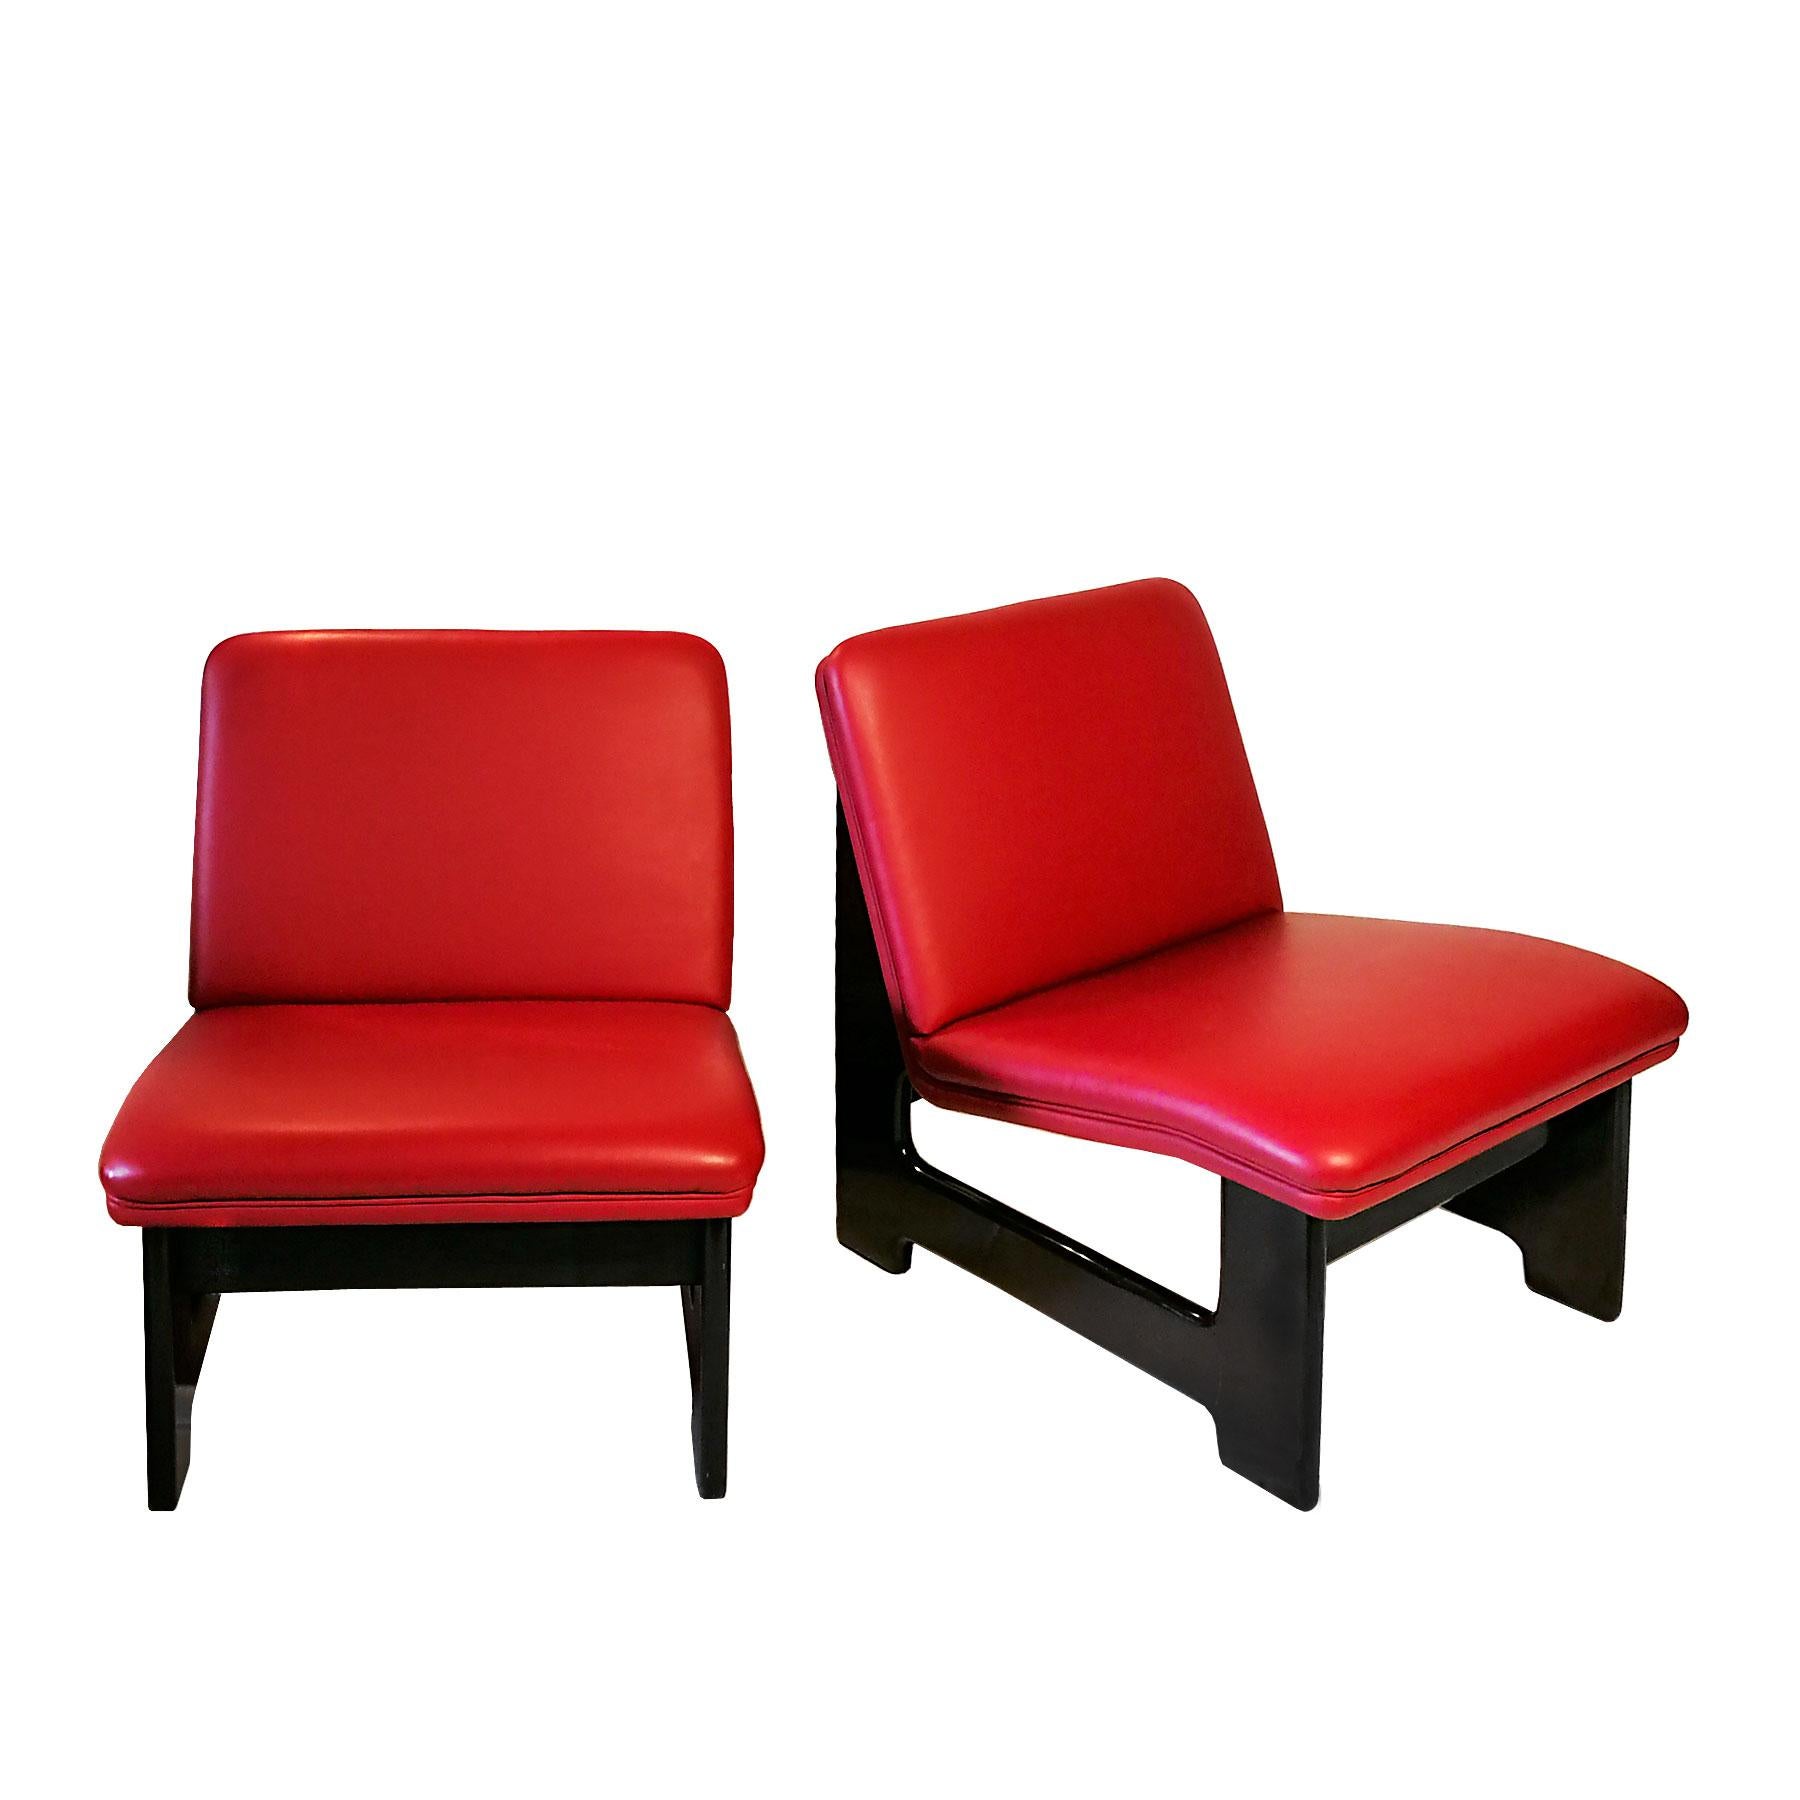 Pair of small armchairs, black varnished wood and new red leather upholstery.

Design: A. García

Spain, Barcelona, circa 1970.